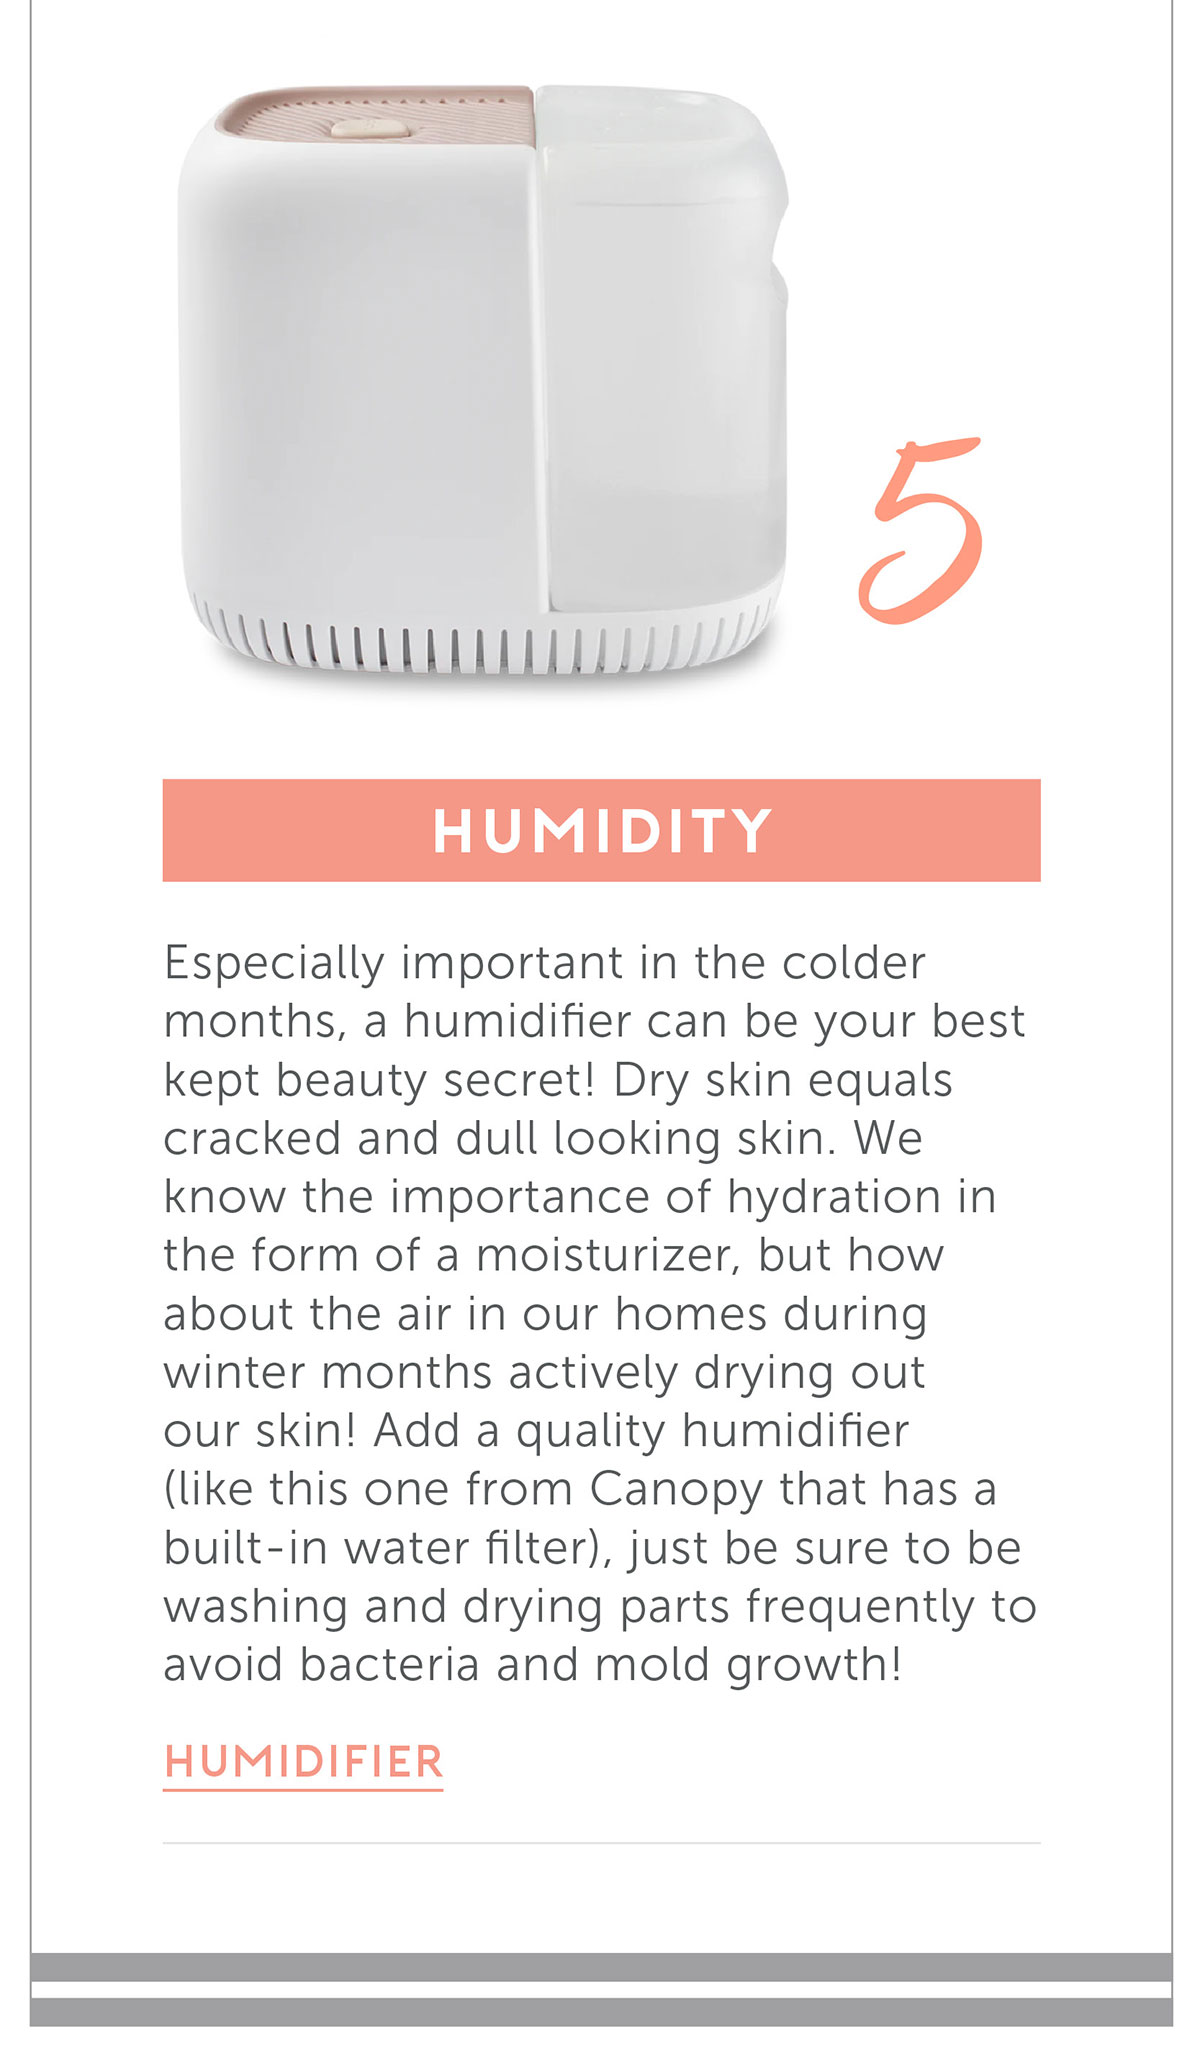 Humidity Especially important in the colder months, a humidifier can be your best kept beauty secret! Dry skin equals cracked and dull looking skin. We know the importance of hydration in the form of a moisturizer, but how about the air in our homes during winter months actively drying out our skin! Add a quality humidifier (like this one from Canopy that has a built in water filter), just be sure to be washing and drying parts frequently to avoid bacteria and mold growth!